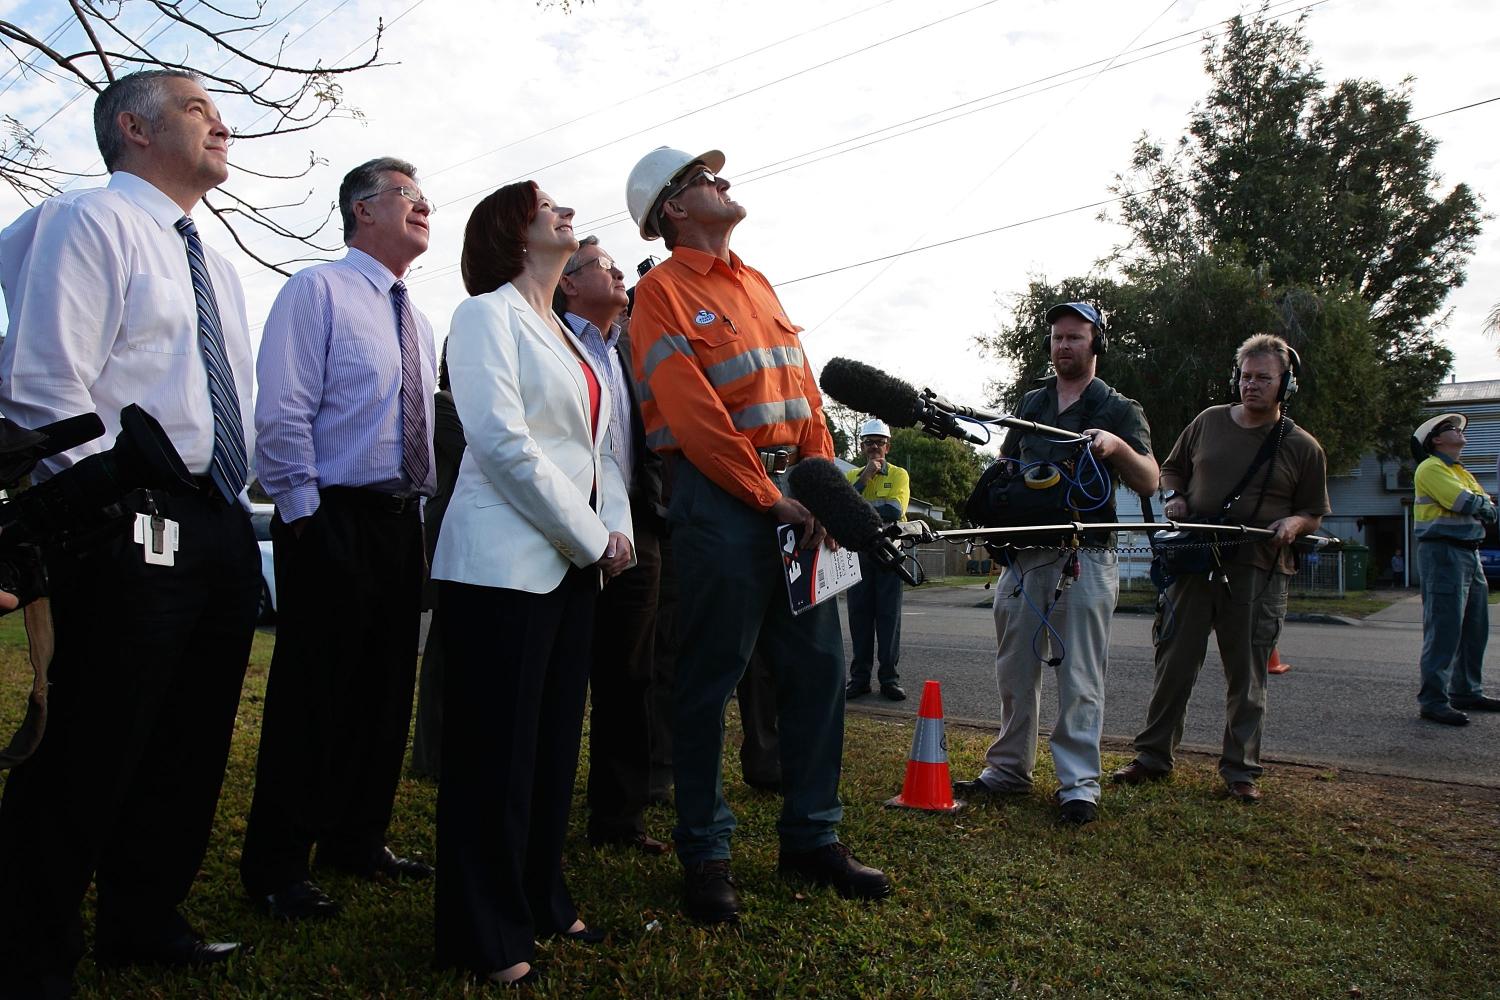 The then Prime Minister, Julia Gillard, at the start of NBN construction in August 2010 (Photo: Lisa Maree Williams/Getty Images)